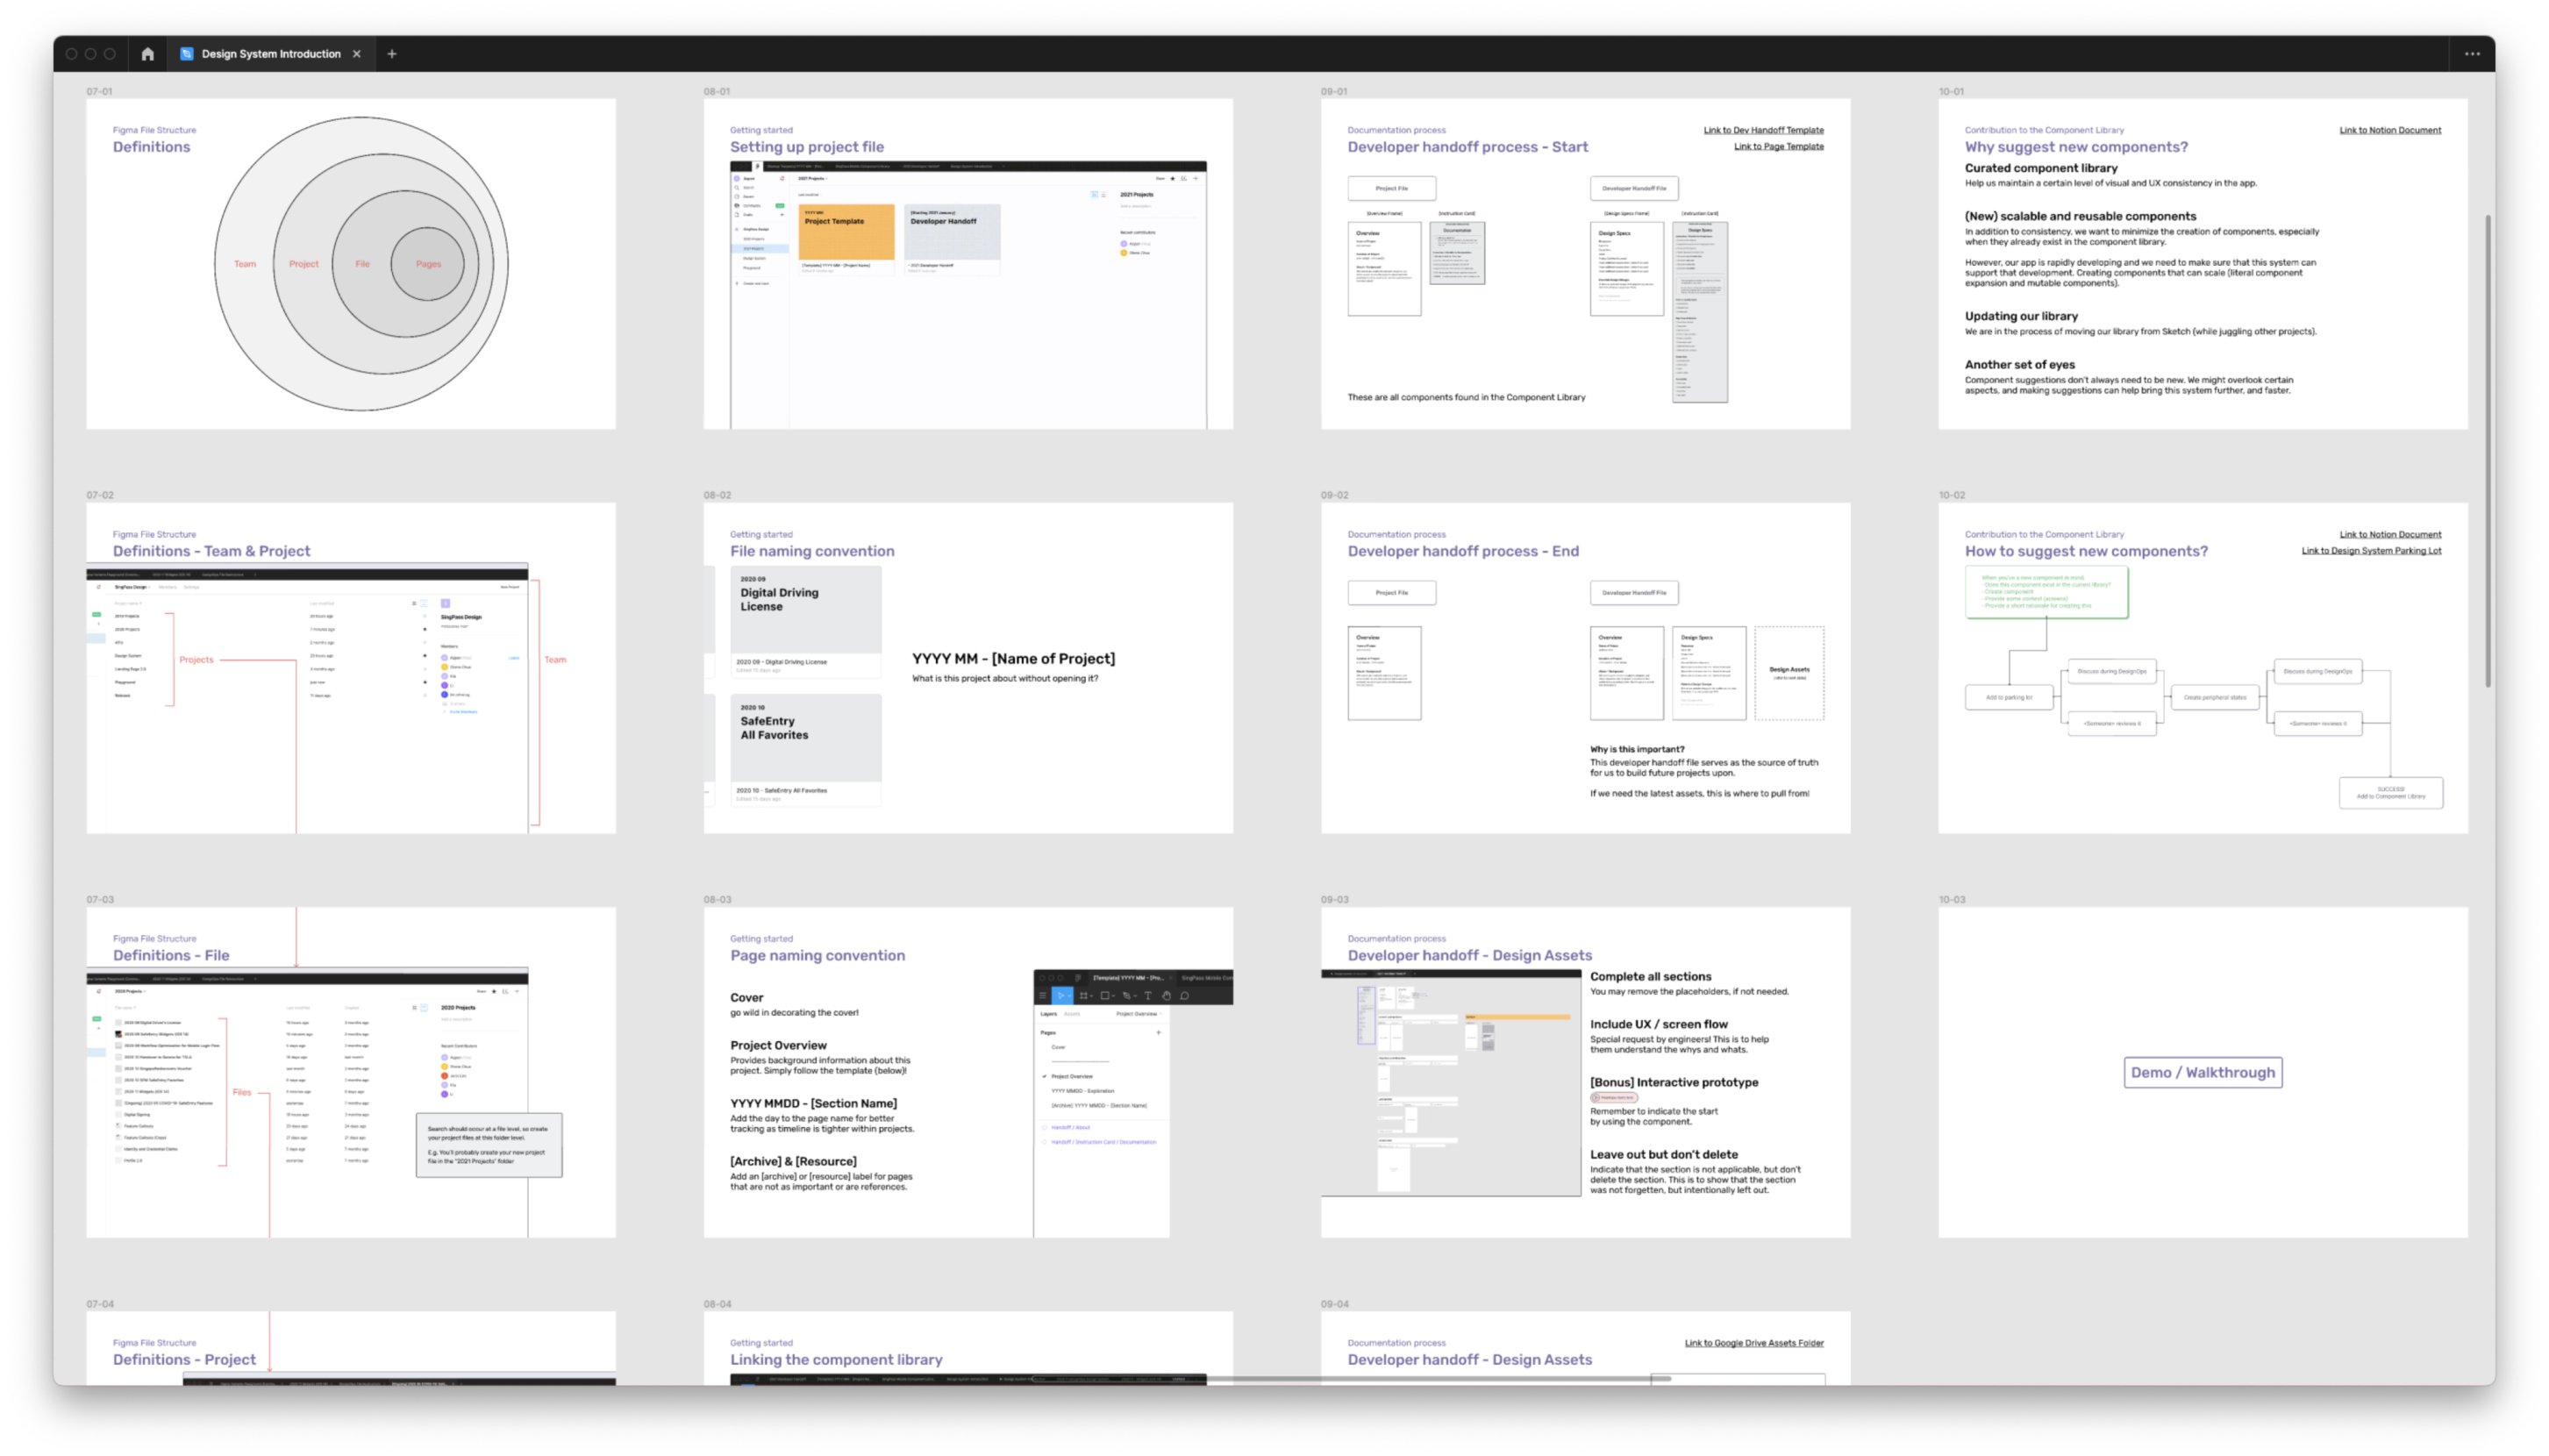 Image shows the slide deck I used to onboard designers and engineers to the design system.